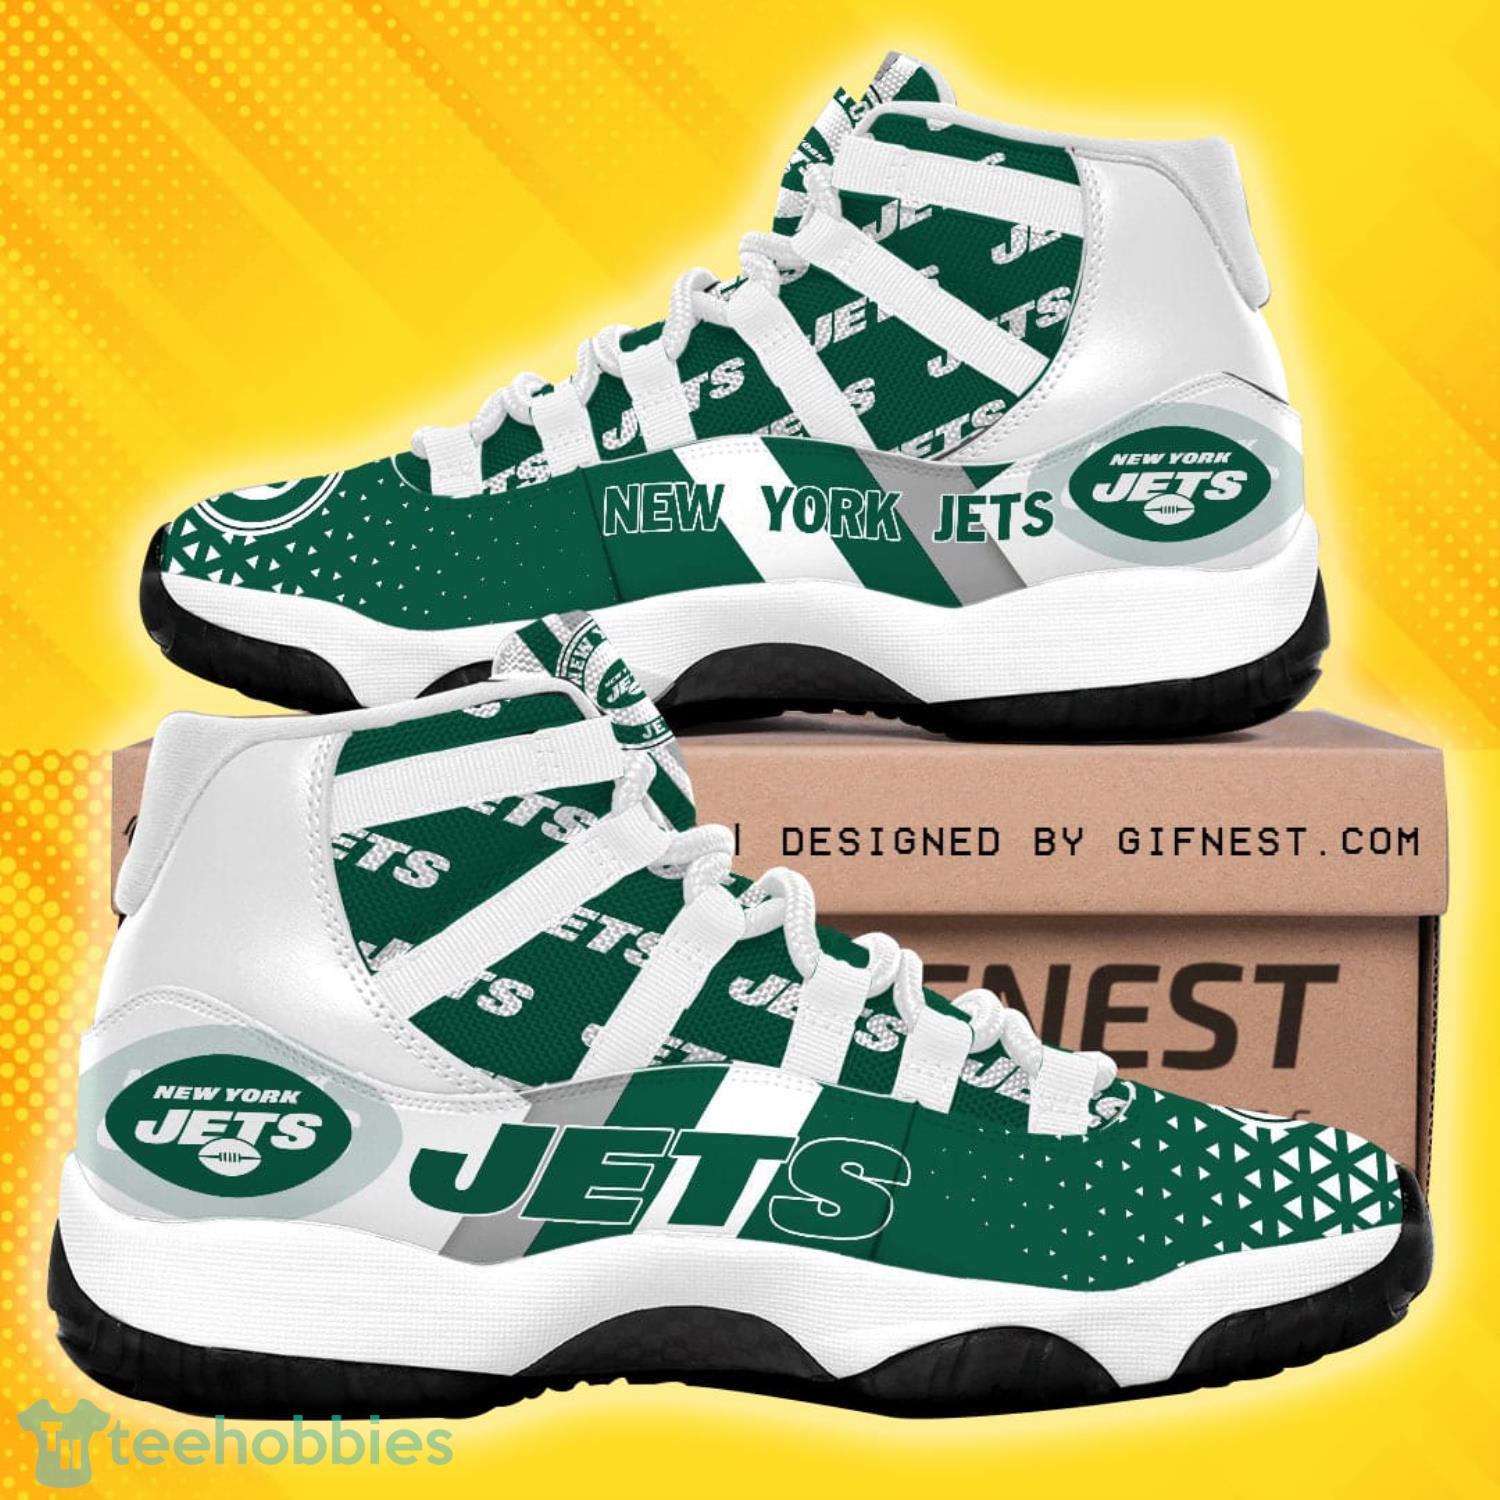 New York Jets Team Air Jordan 11 Shoes For Fans Product Photo 1